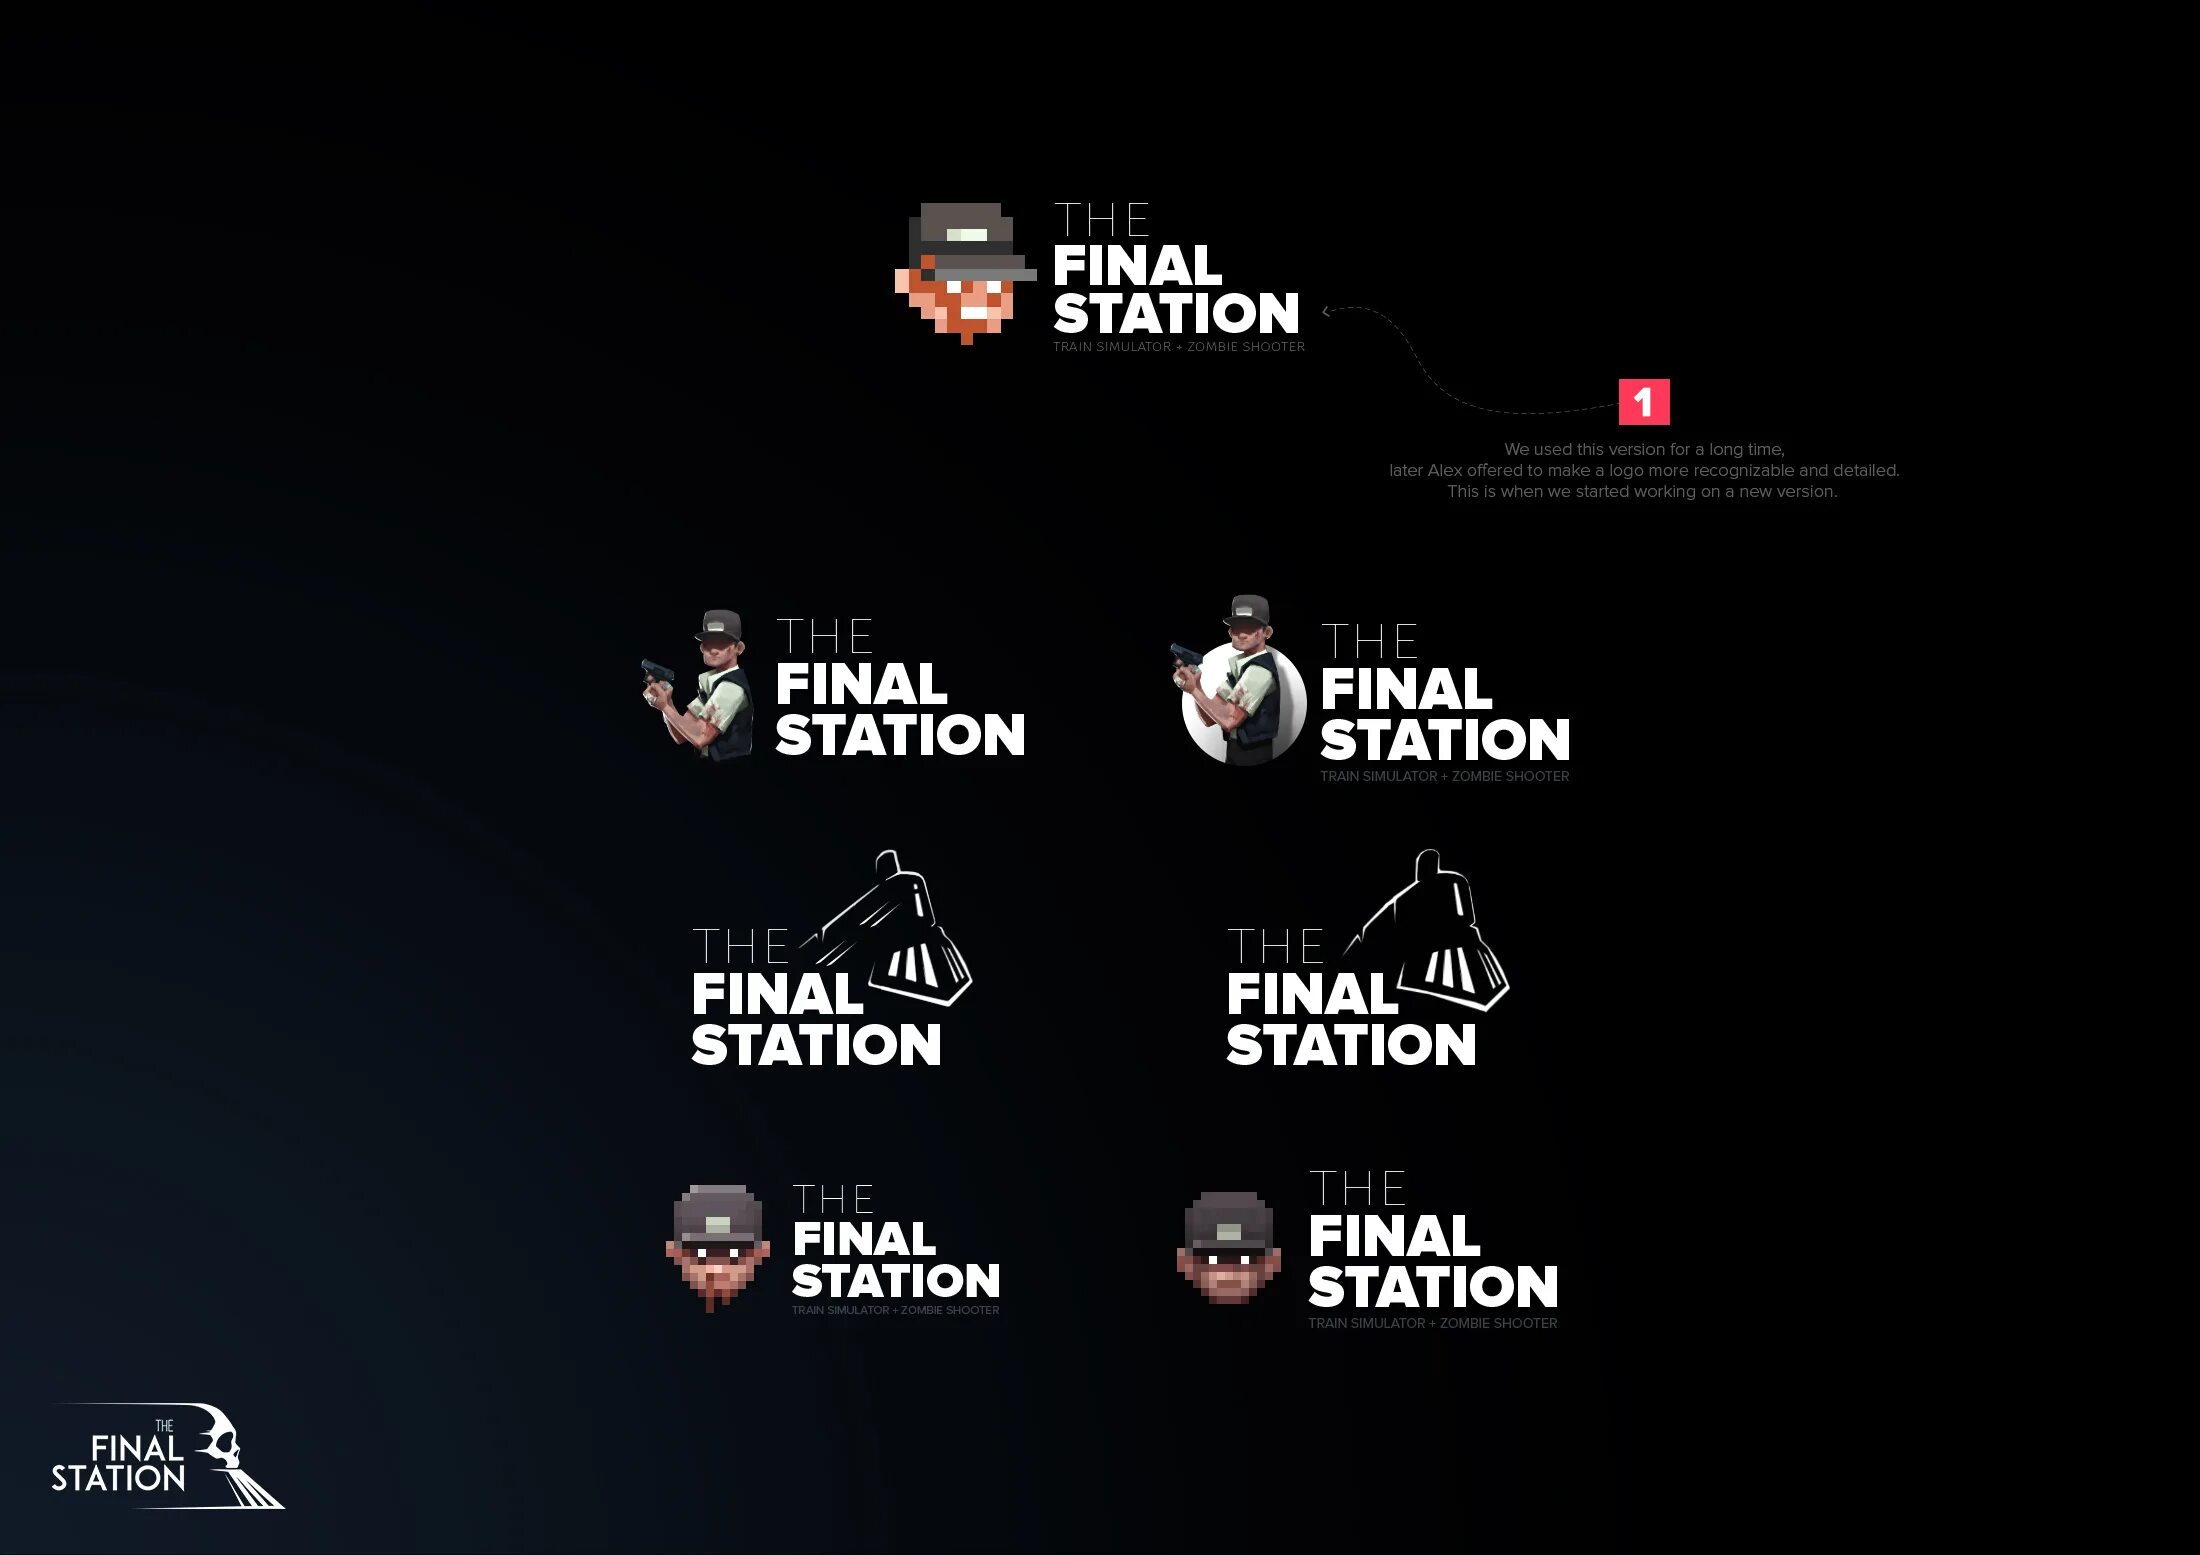 The finals музыка. The Final Station. The Final Station артбук. The Final Station Страж. Final Station игра.